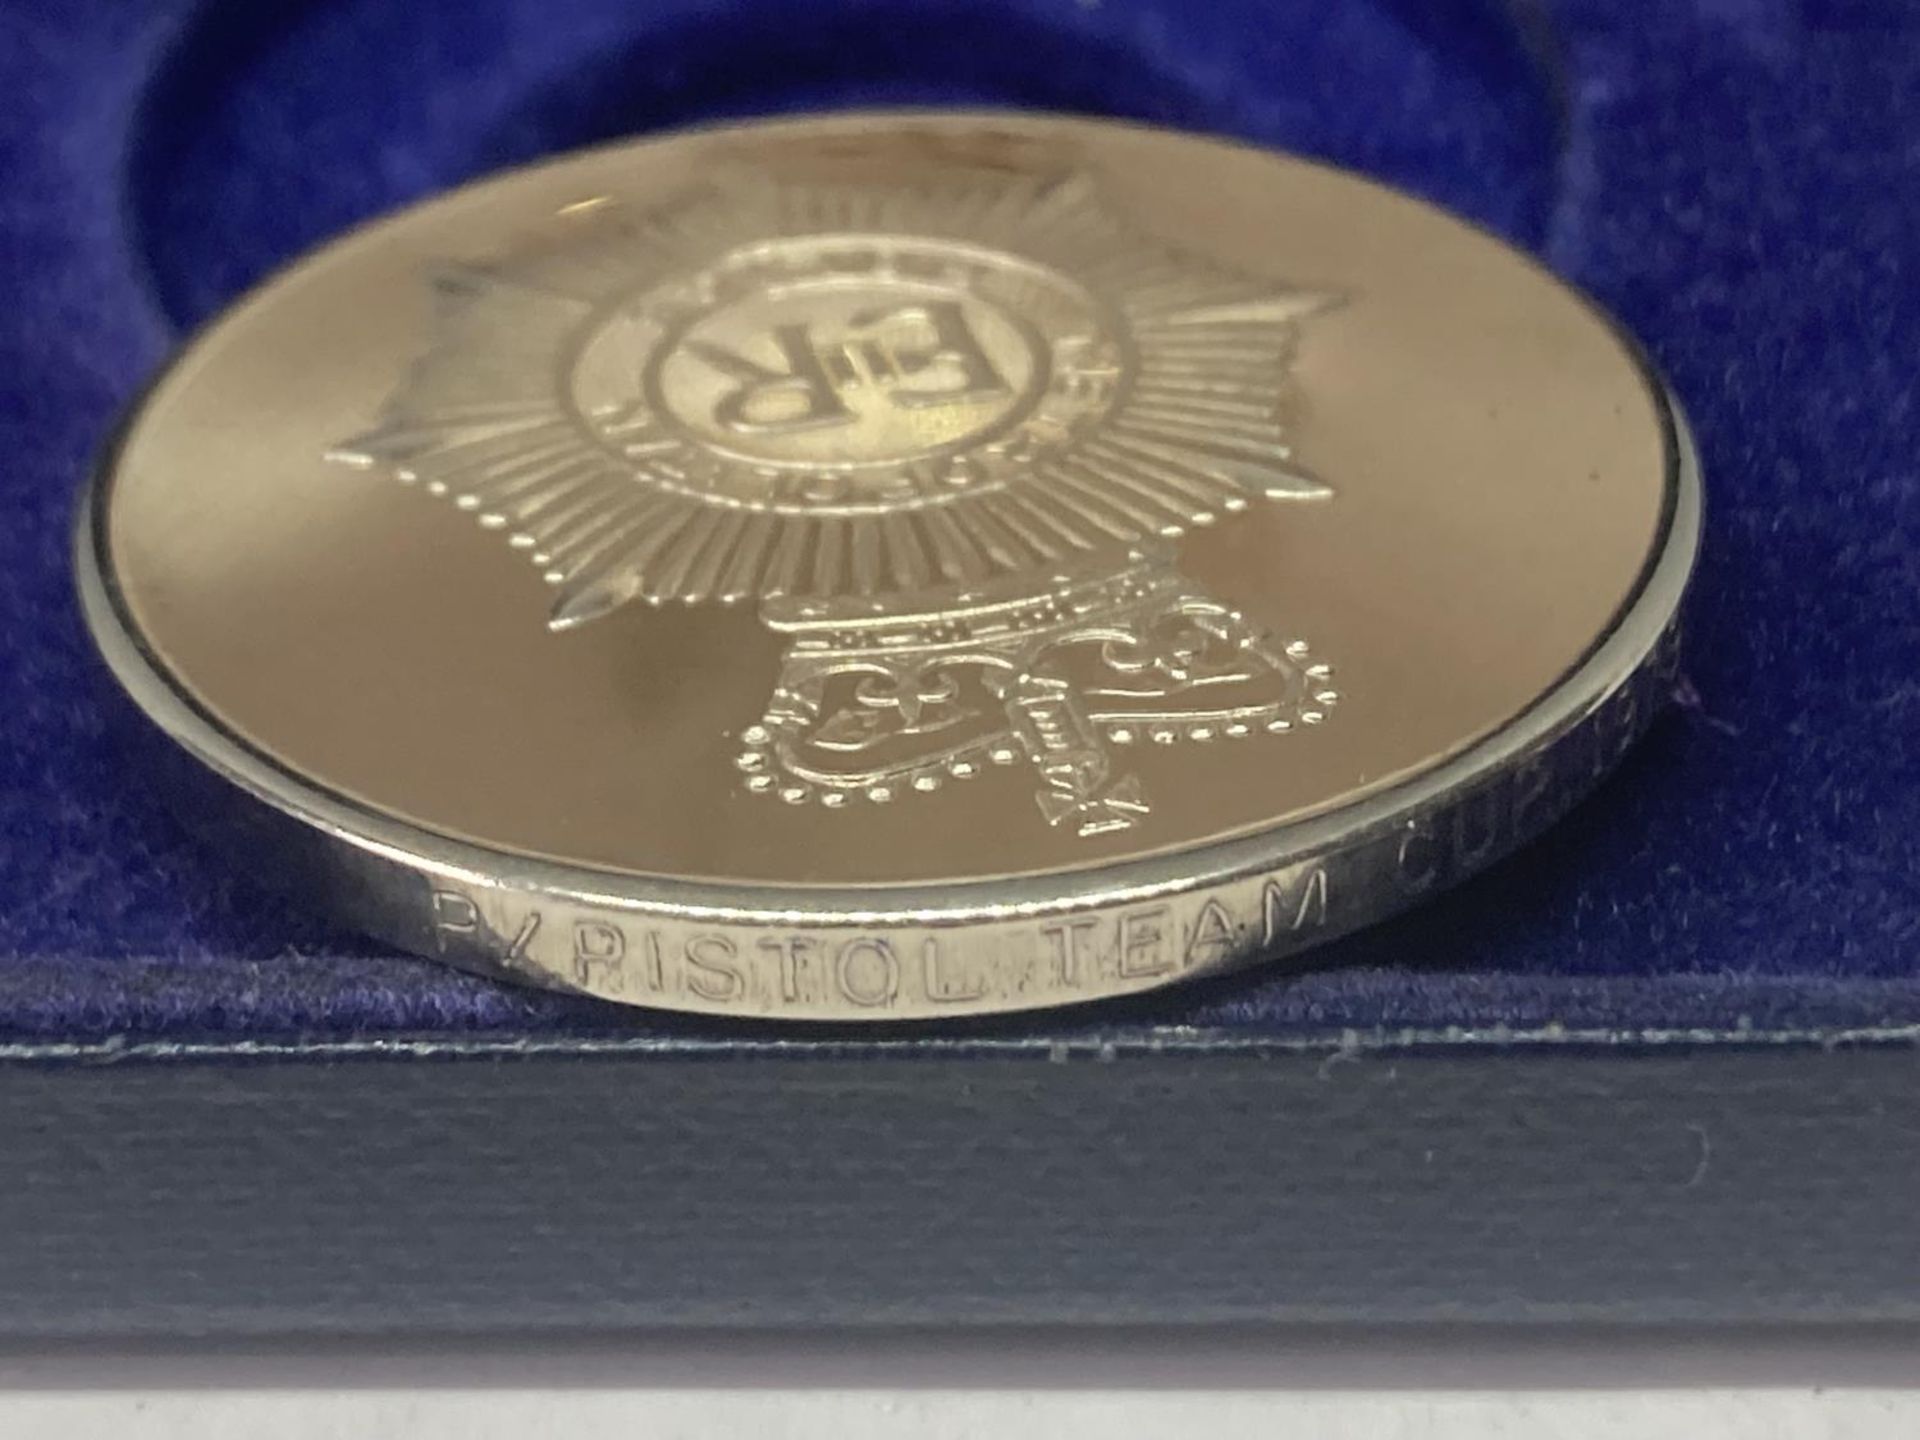 A SILVER TOWER MINT METROPOLITAN POLICE 150TH ANNIVERSARY MEDAL IN A PRESENTATION BOX - Image 8 of 8